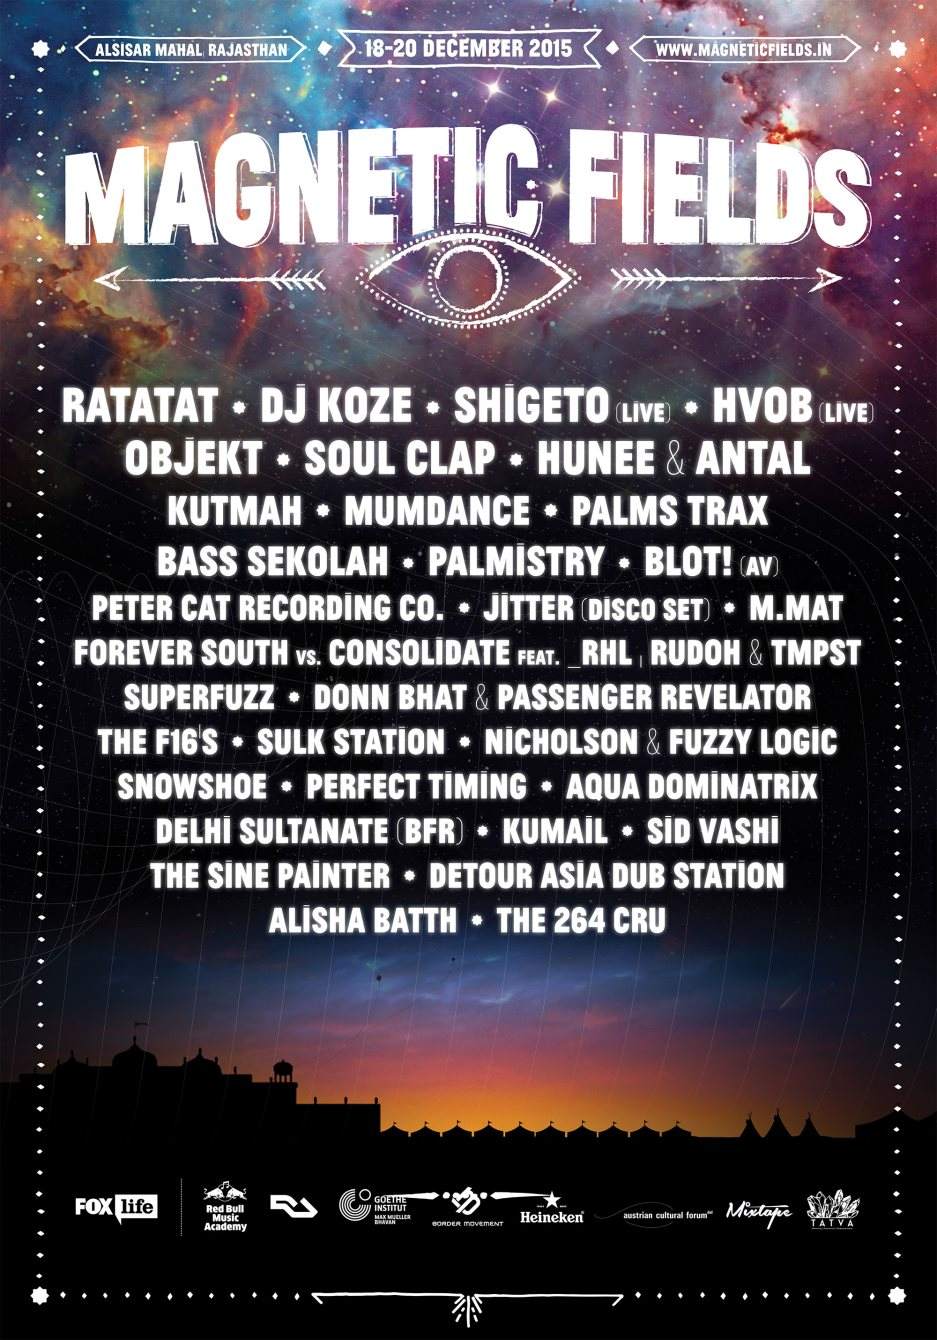 Magnetic Fields Festival 2015 - フライヤー表